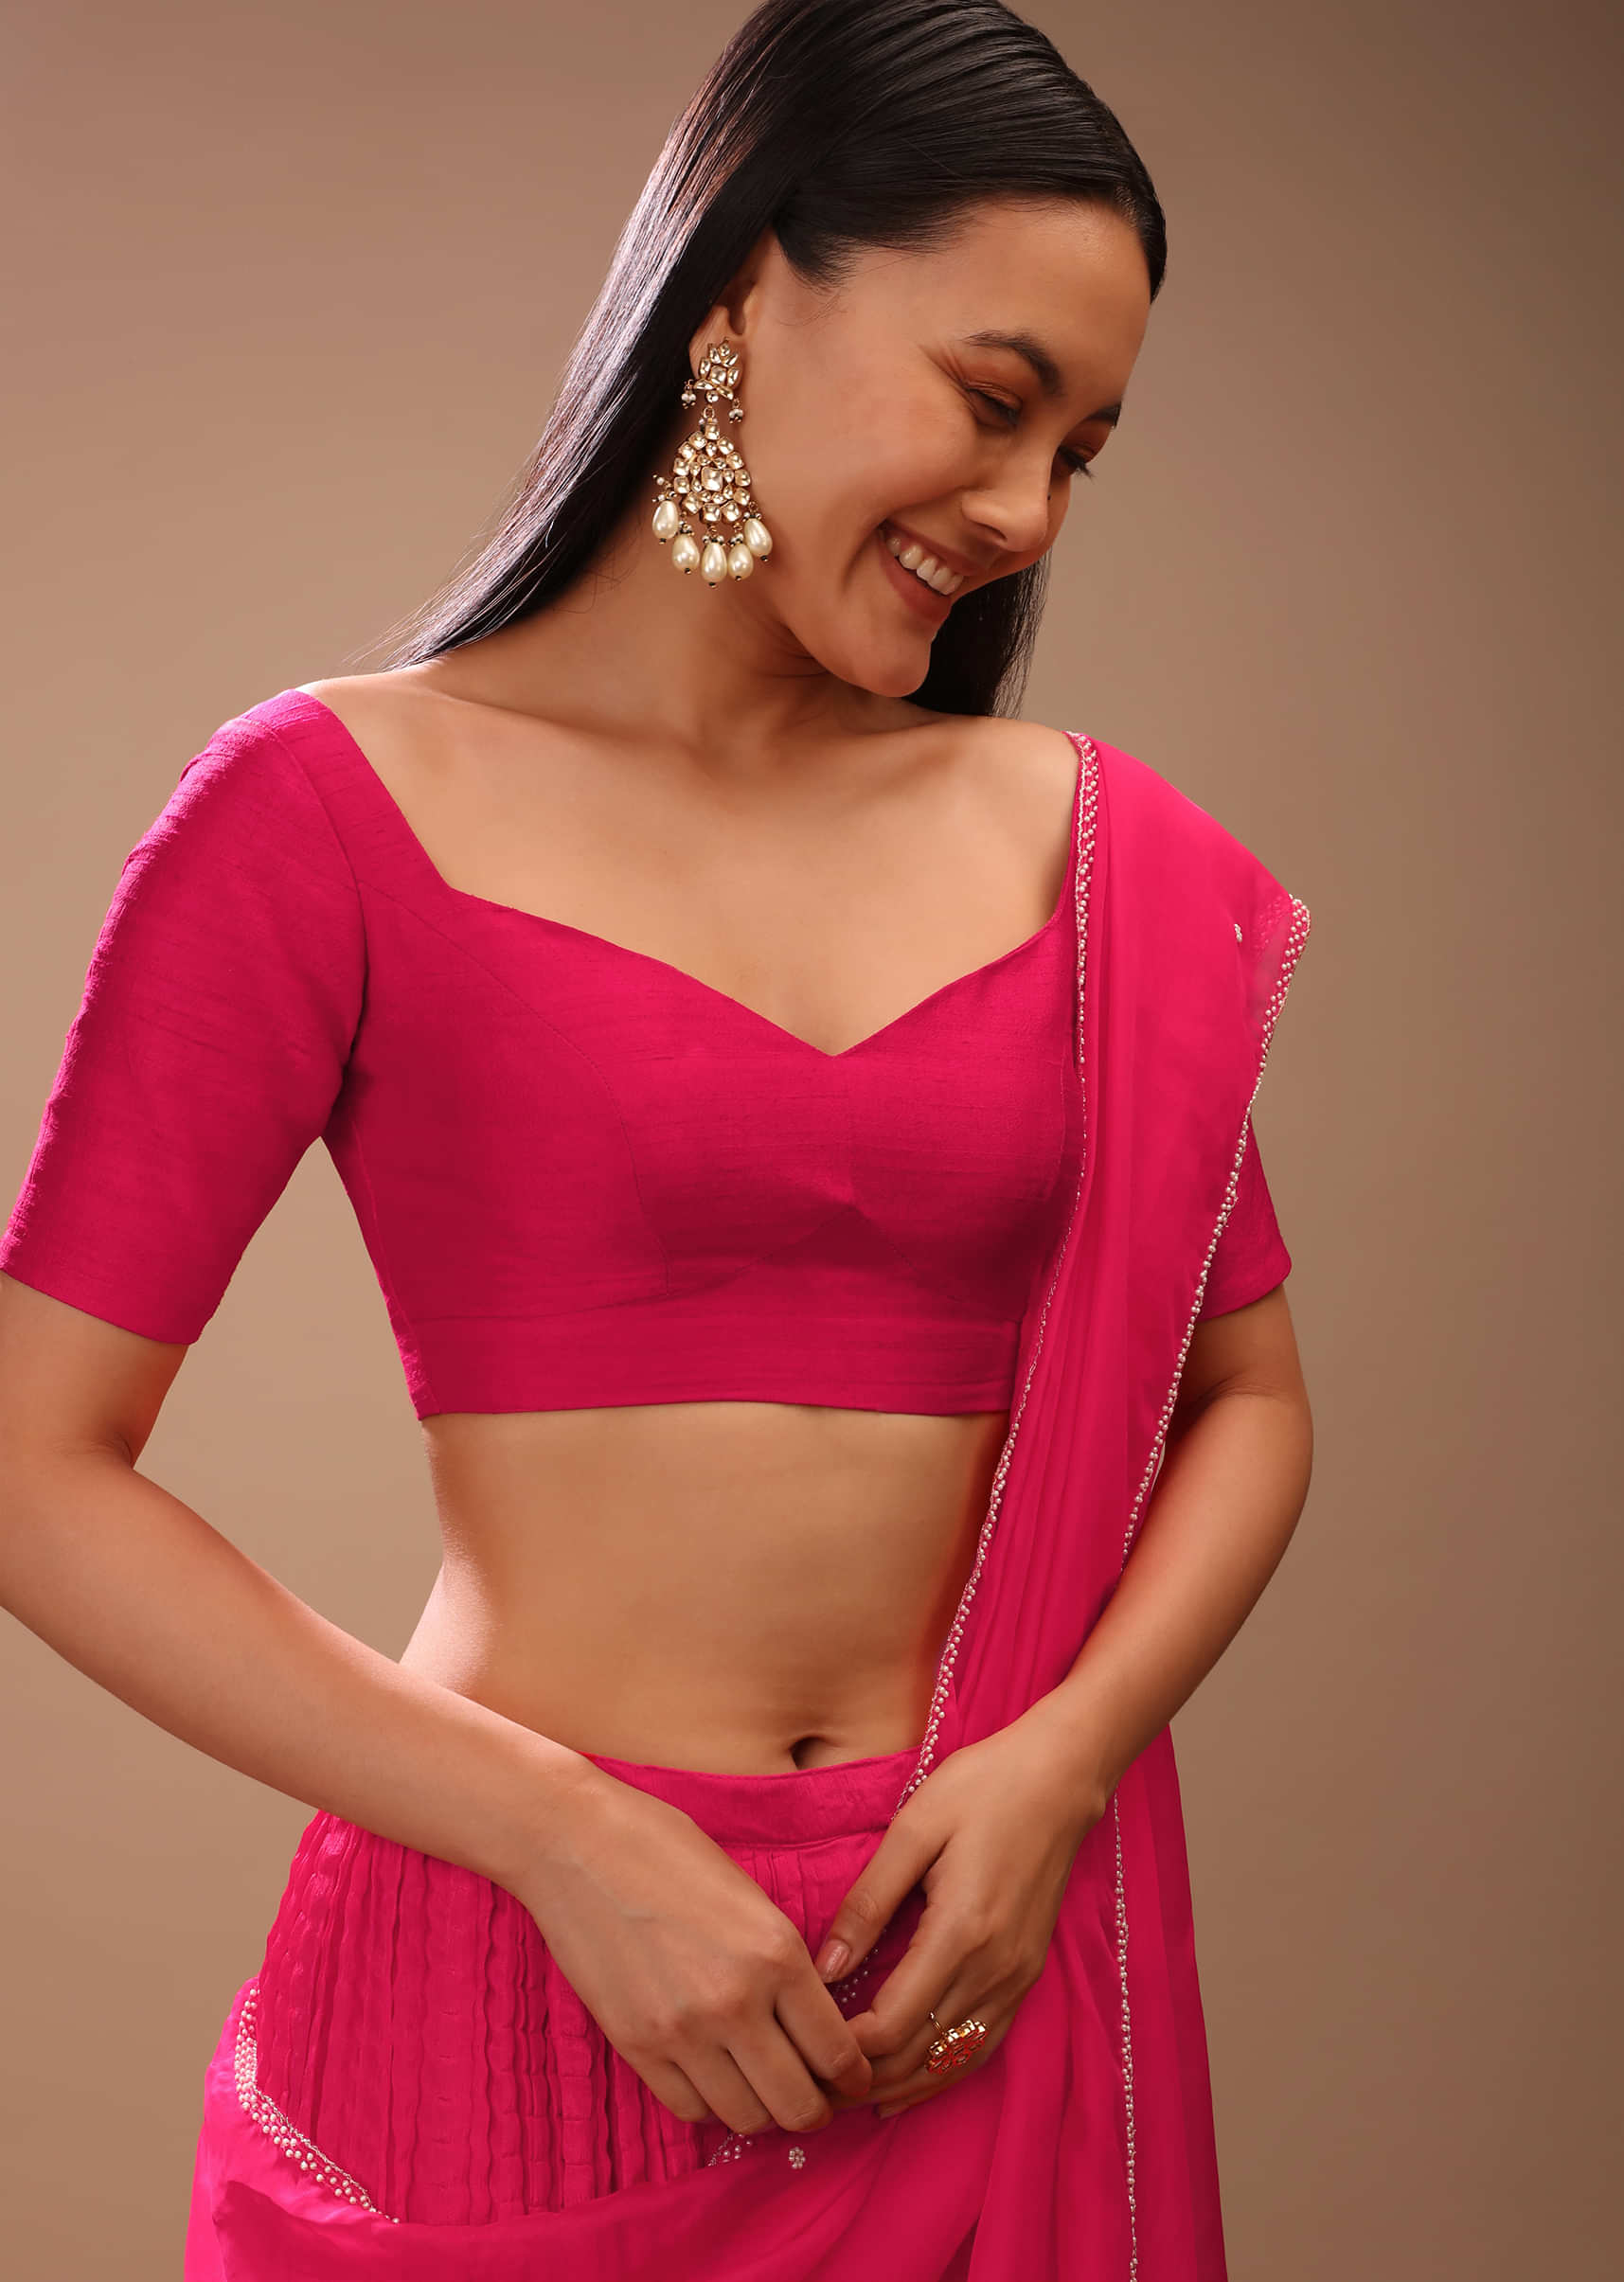 Latest Silk Sarees Blouse Designs to Up Your Style Game • Keep Me Stylish